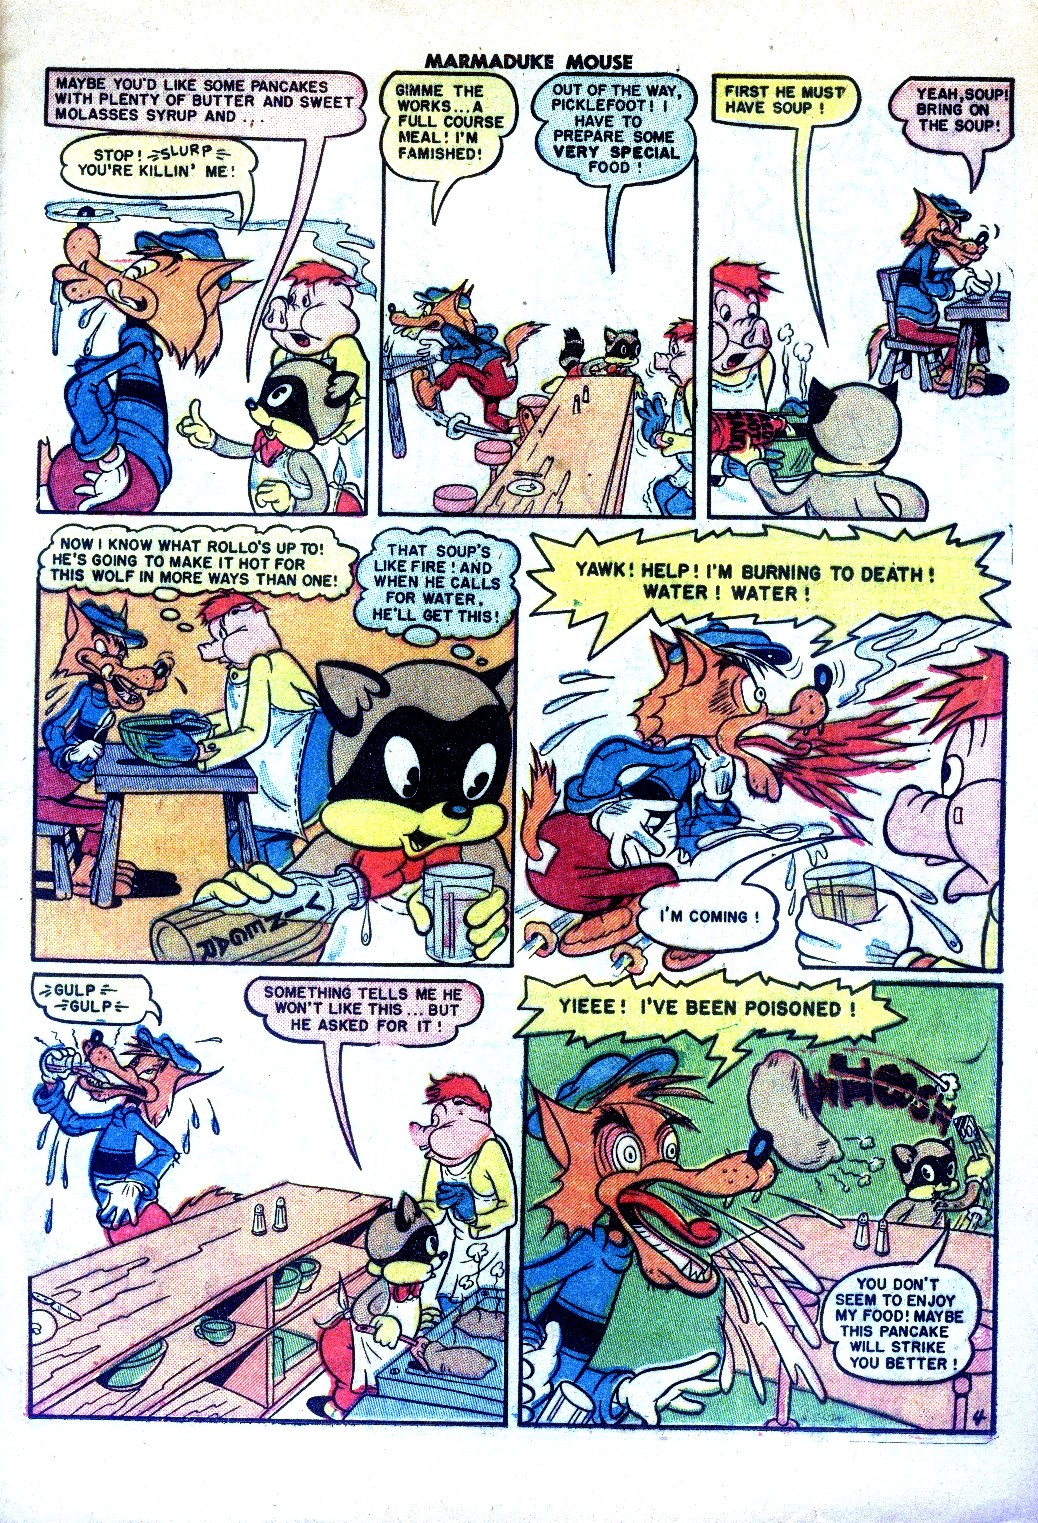 Read online Marmaduke Mouse comic -  Issue #26 - 25